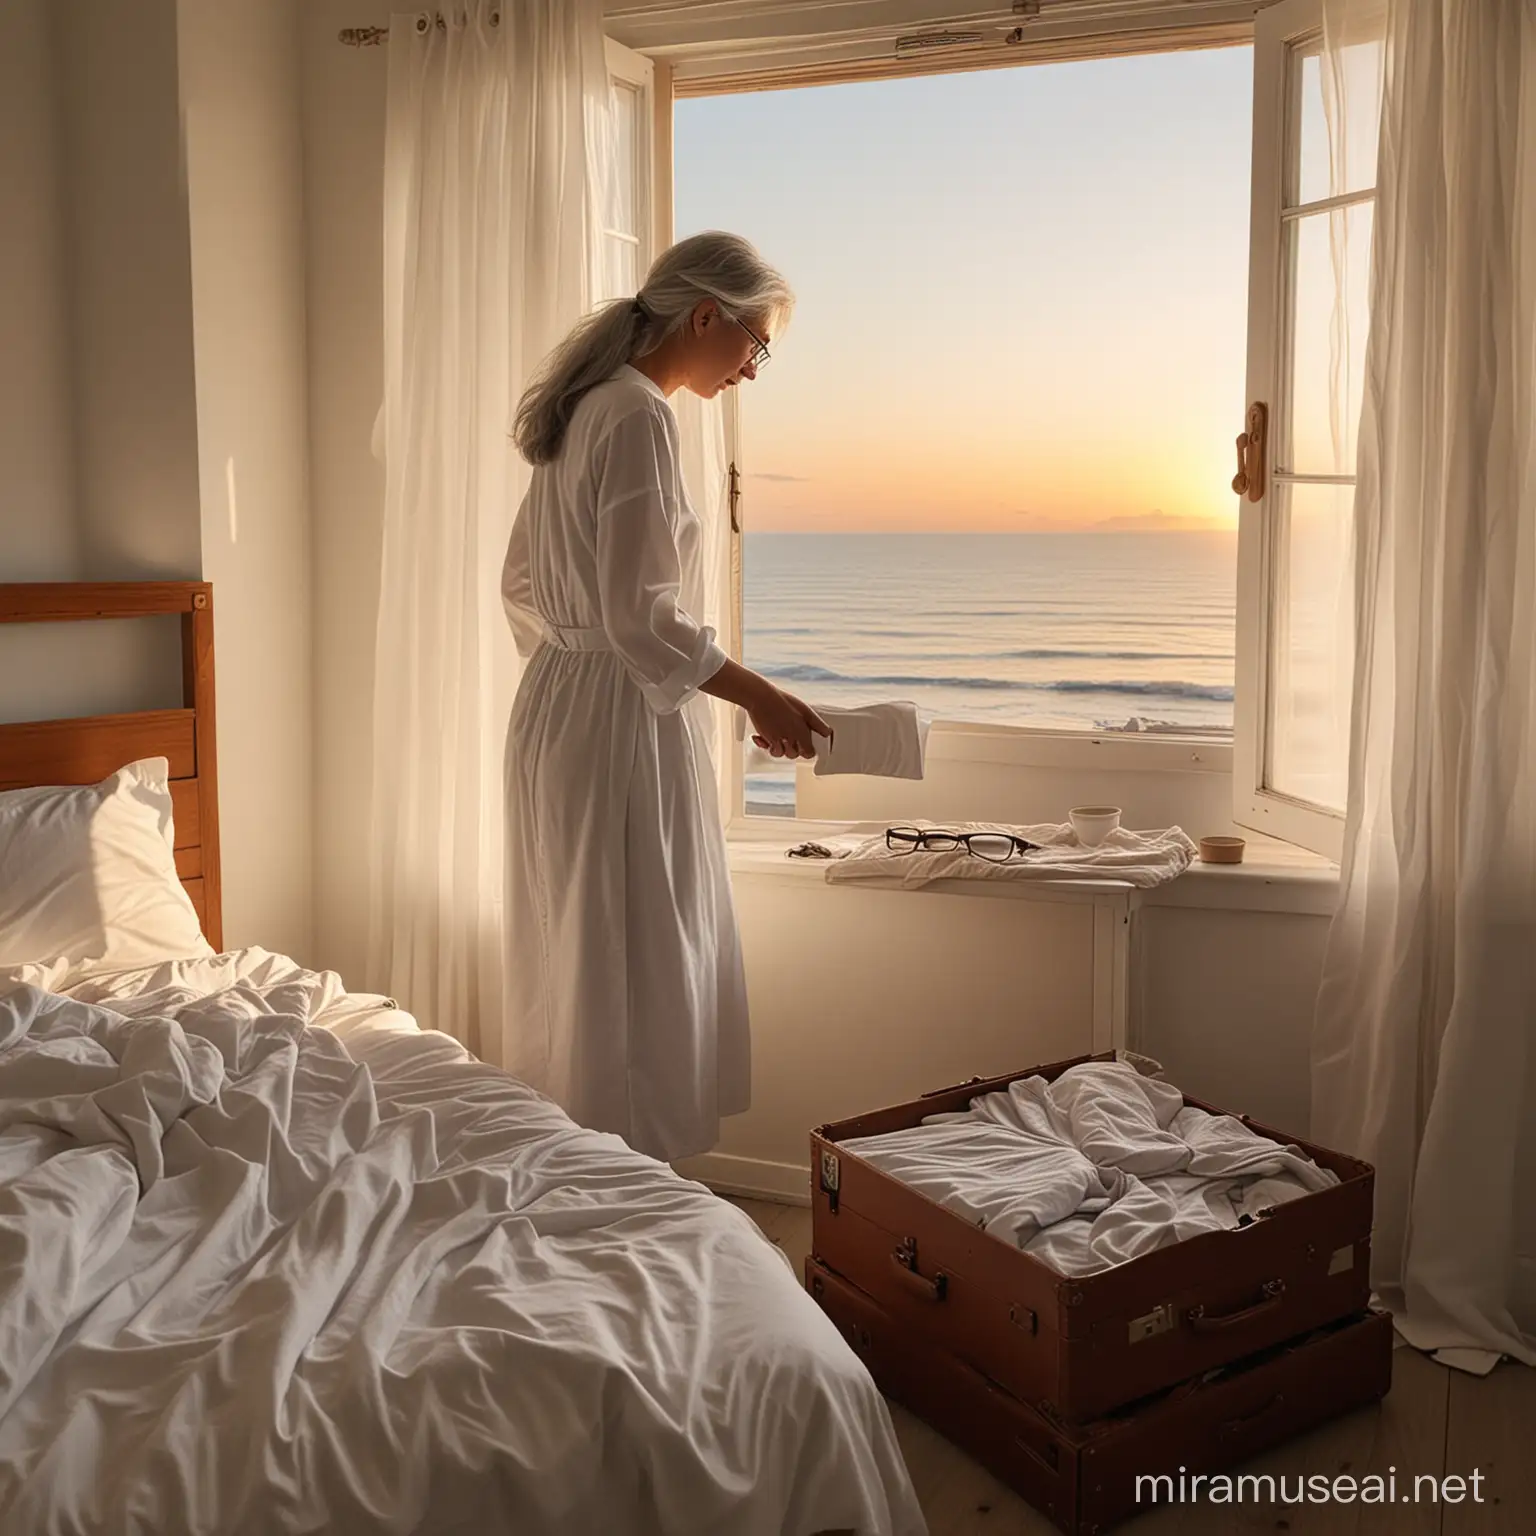 Elderly Person Enjoying Sunset View with Youngster Unpacking Suitcase